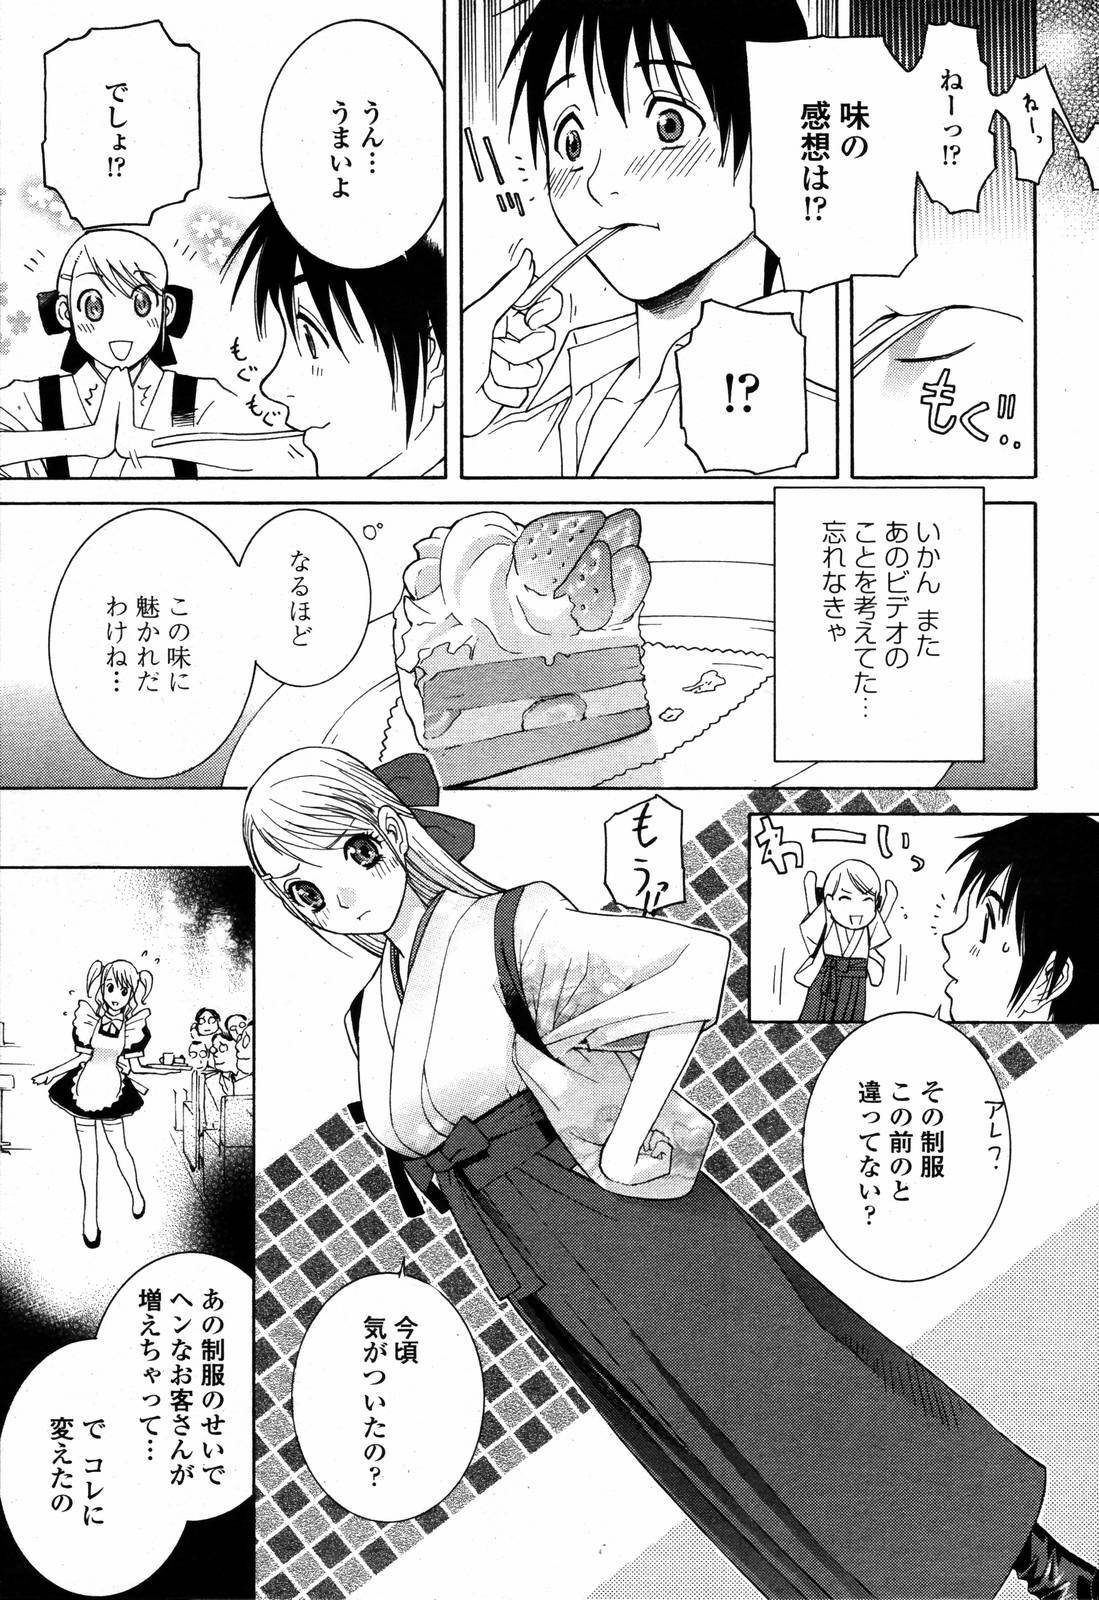 COMIC Momohime 2006-09 page 33 full